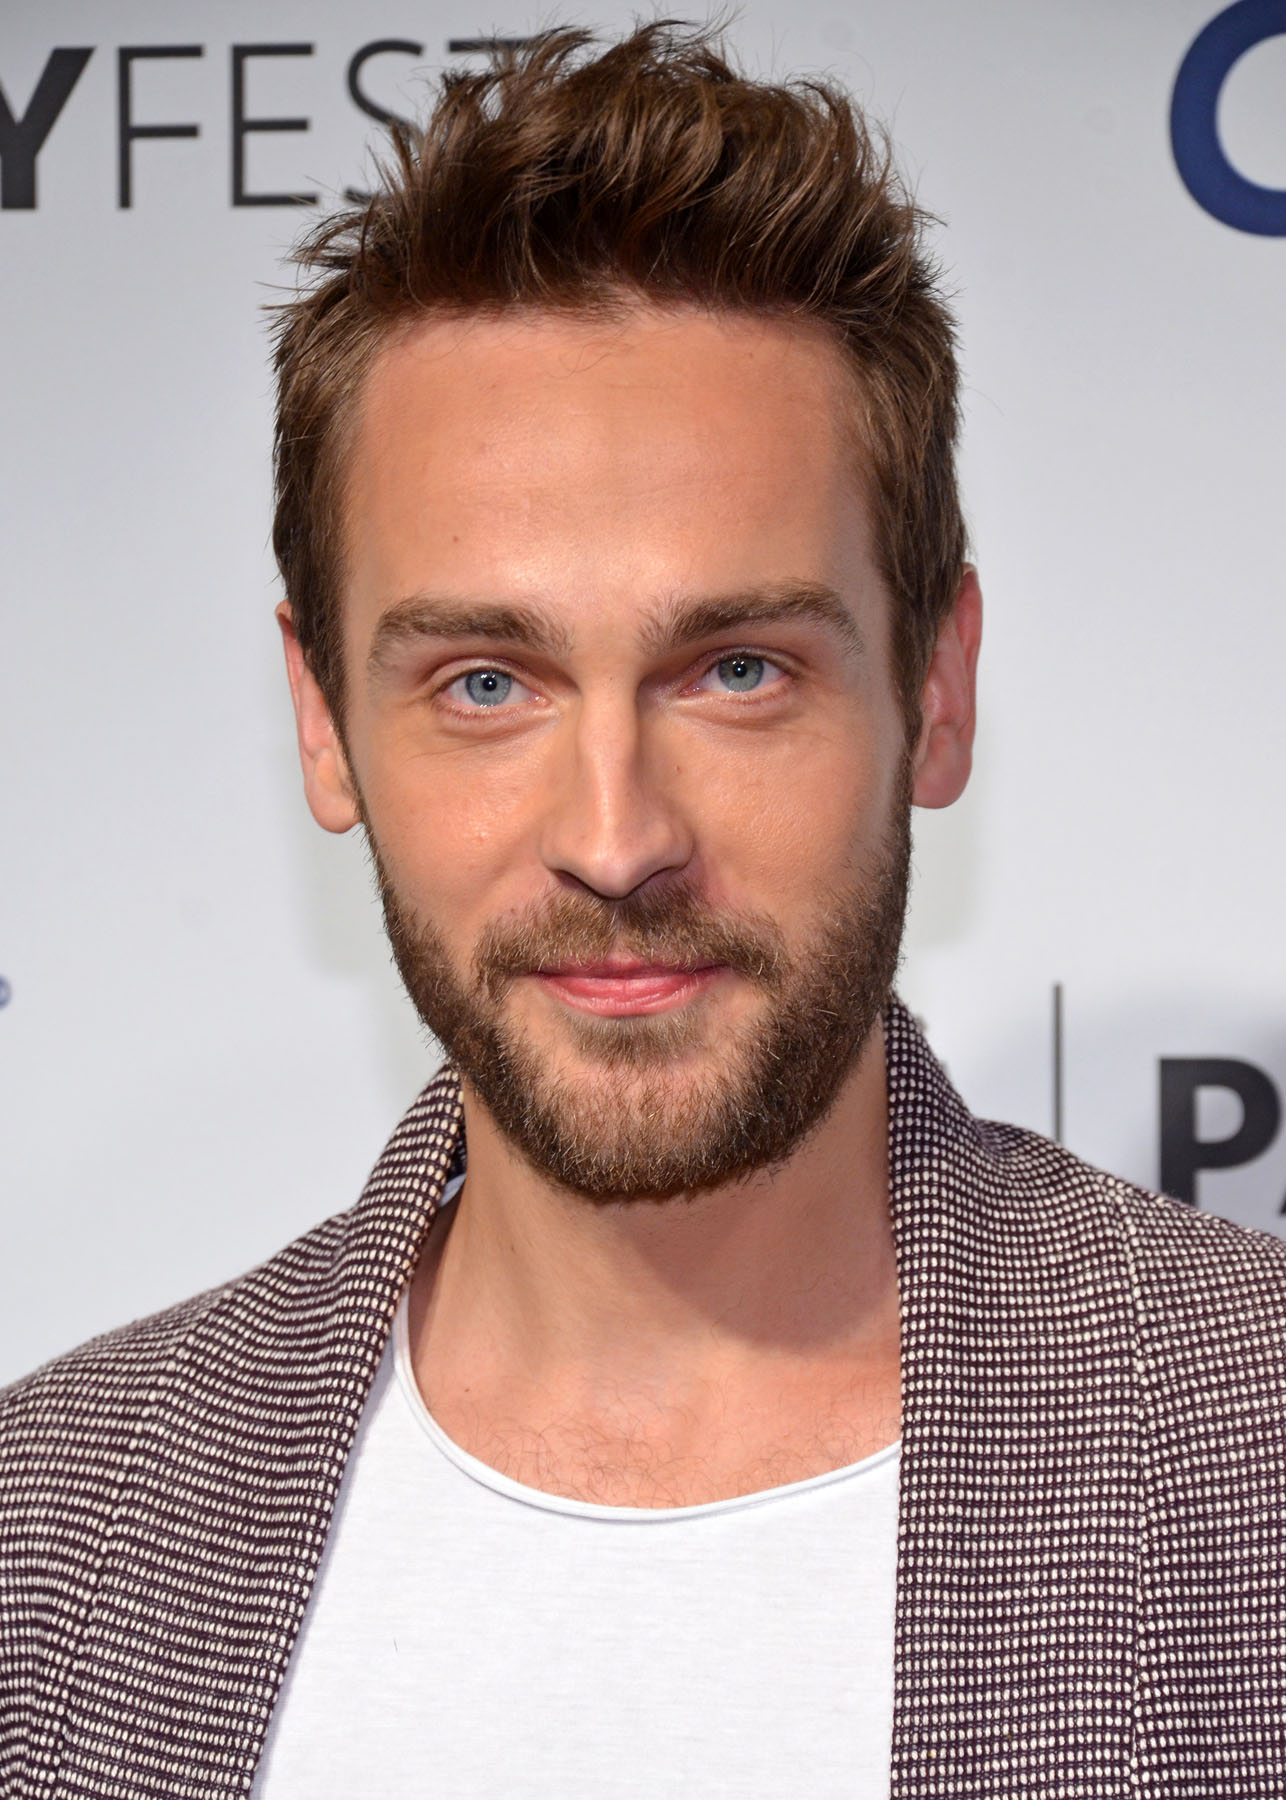 Current Projects tom misoncom